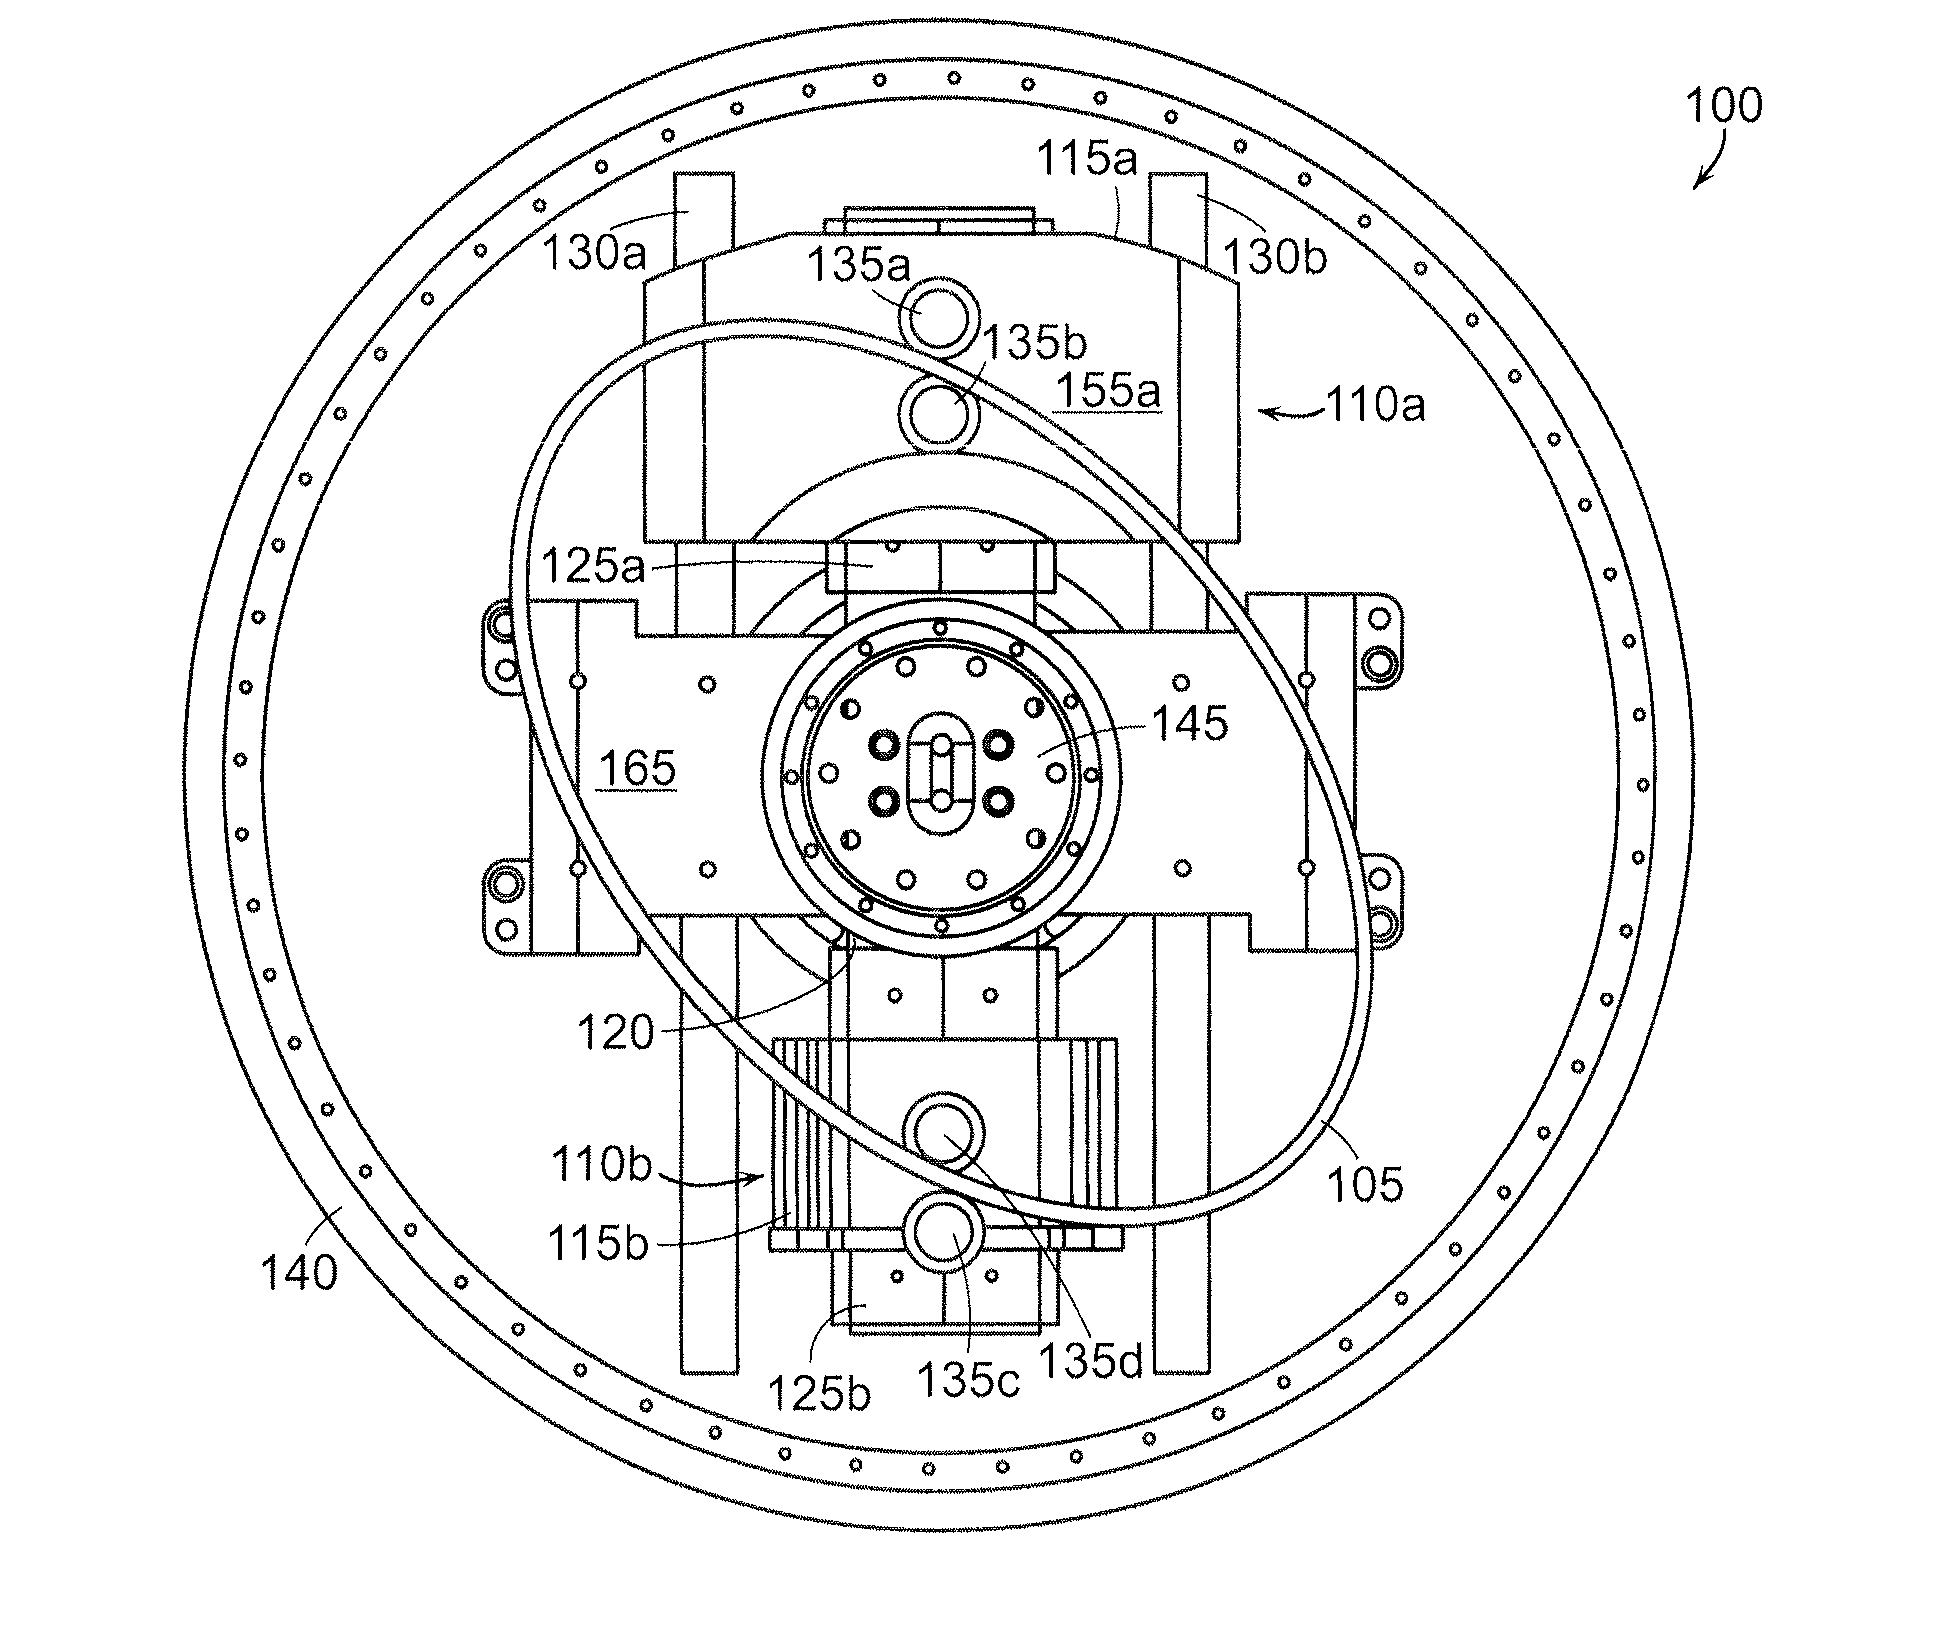 Linear electric machine with linear-to-rotary converter